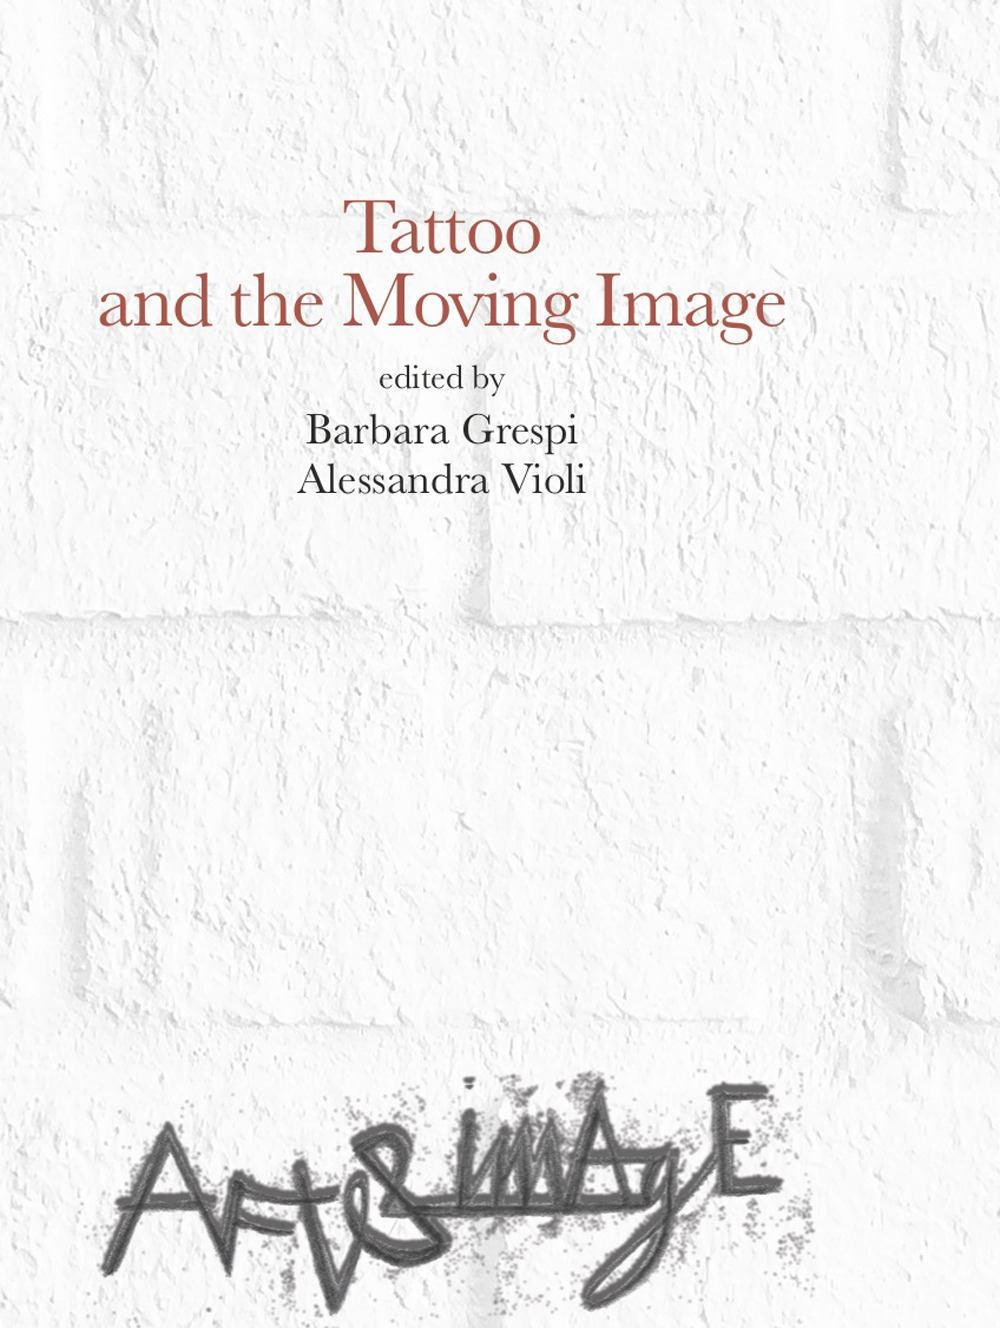 Tattoo and the Moving Image